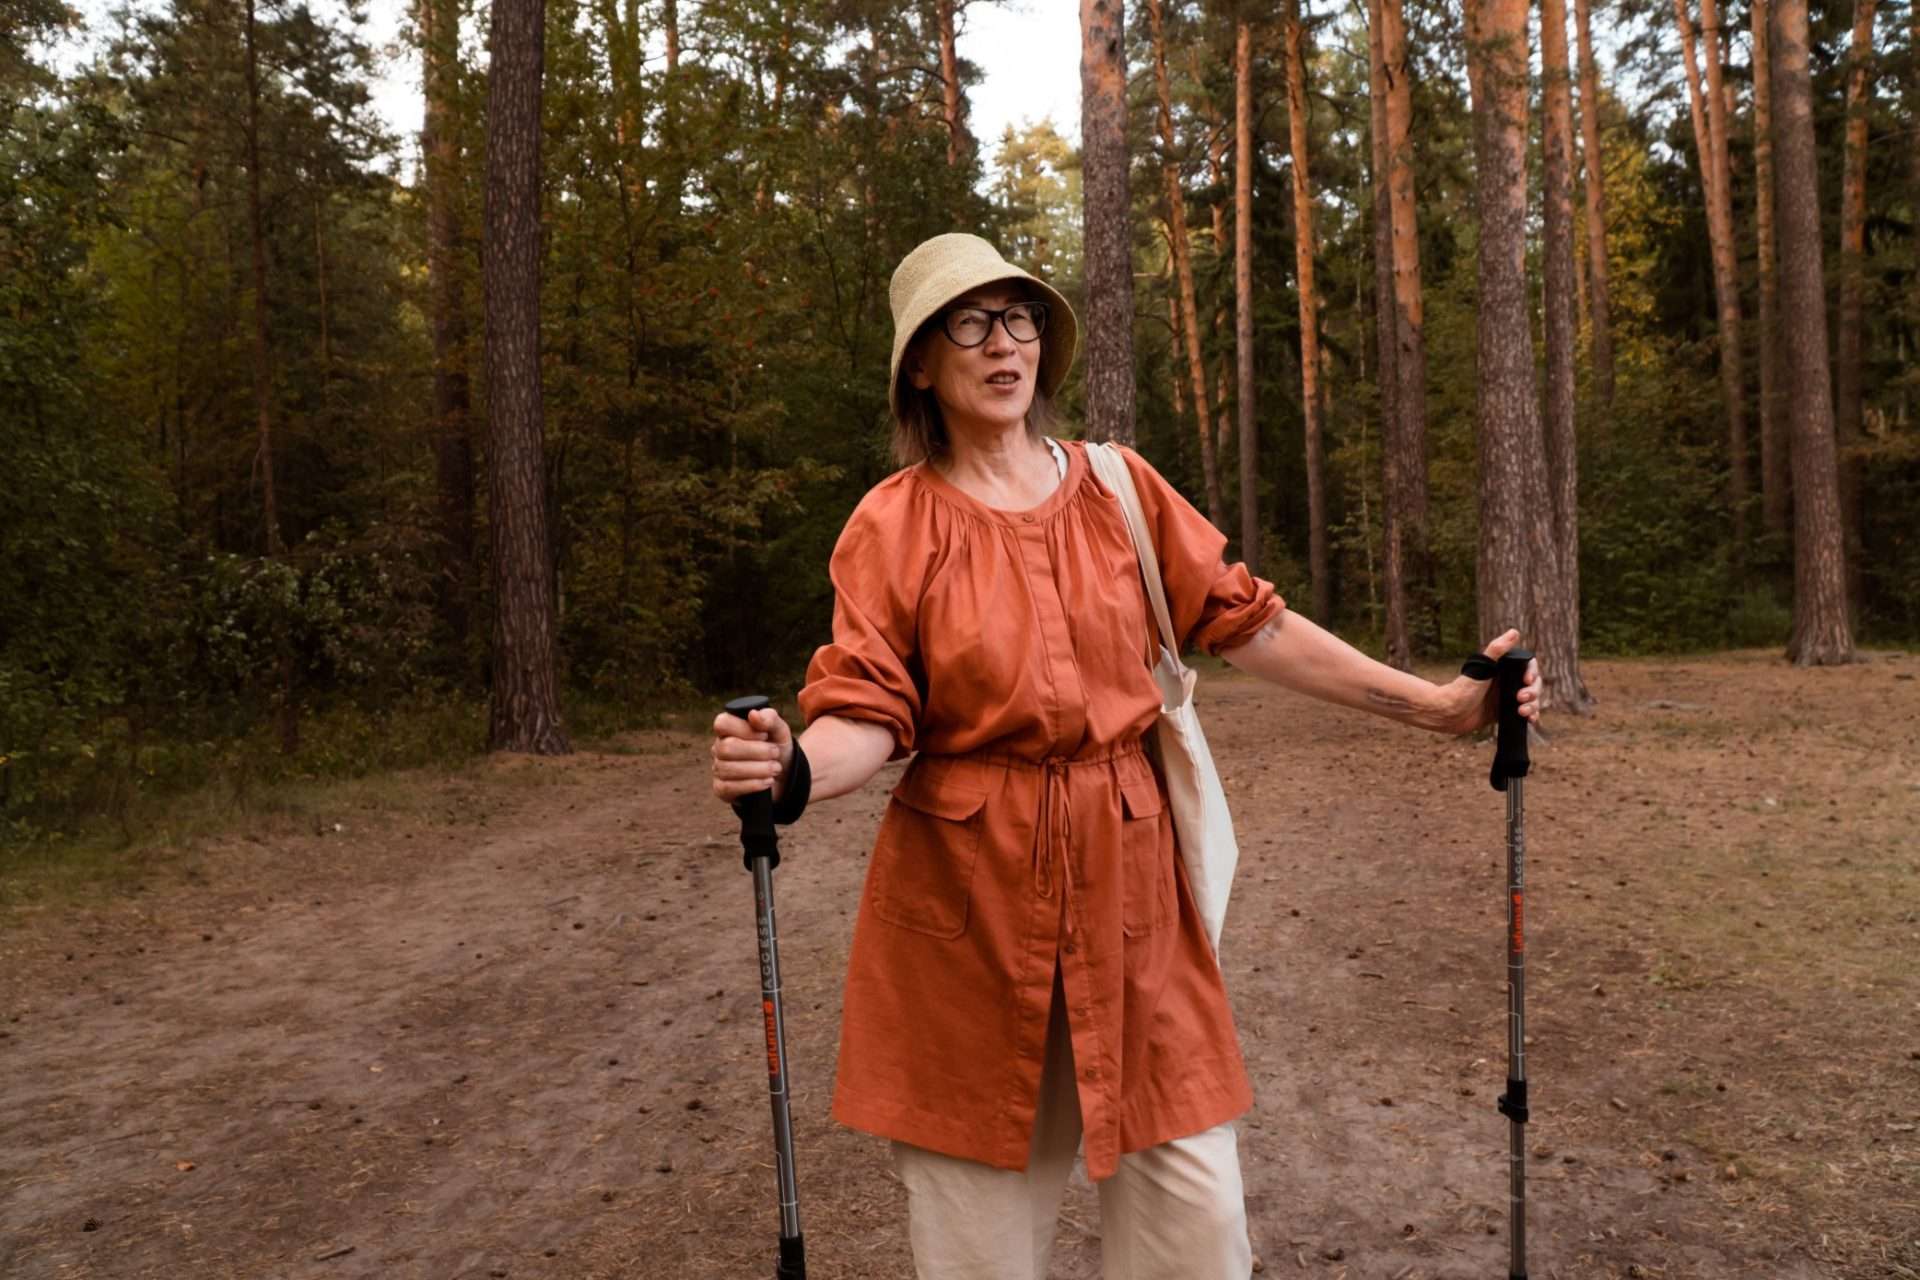 Older woman using trekking poles while hiking in forest.